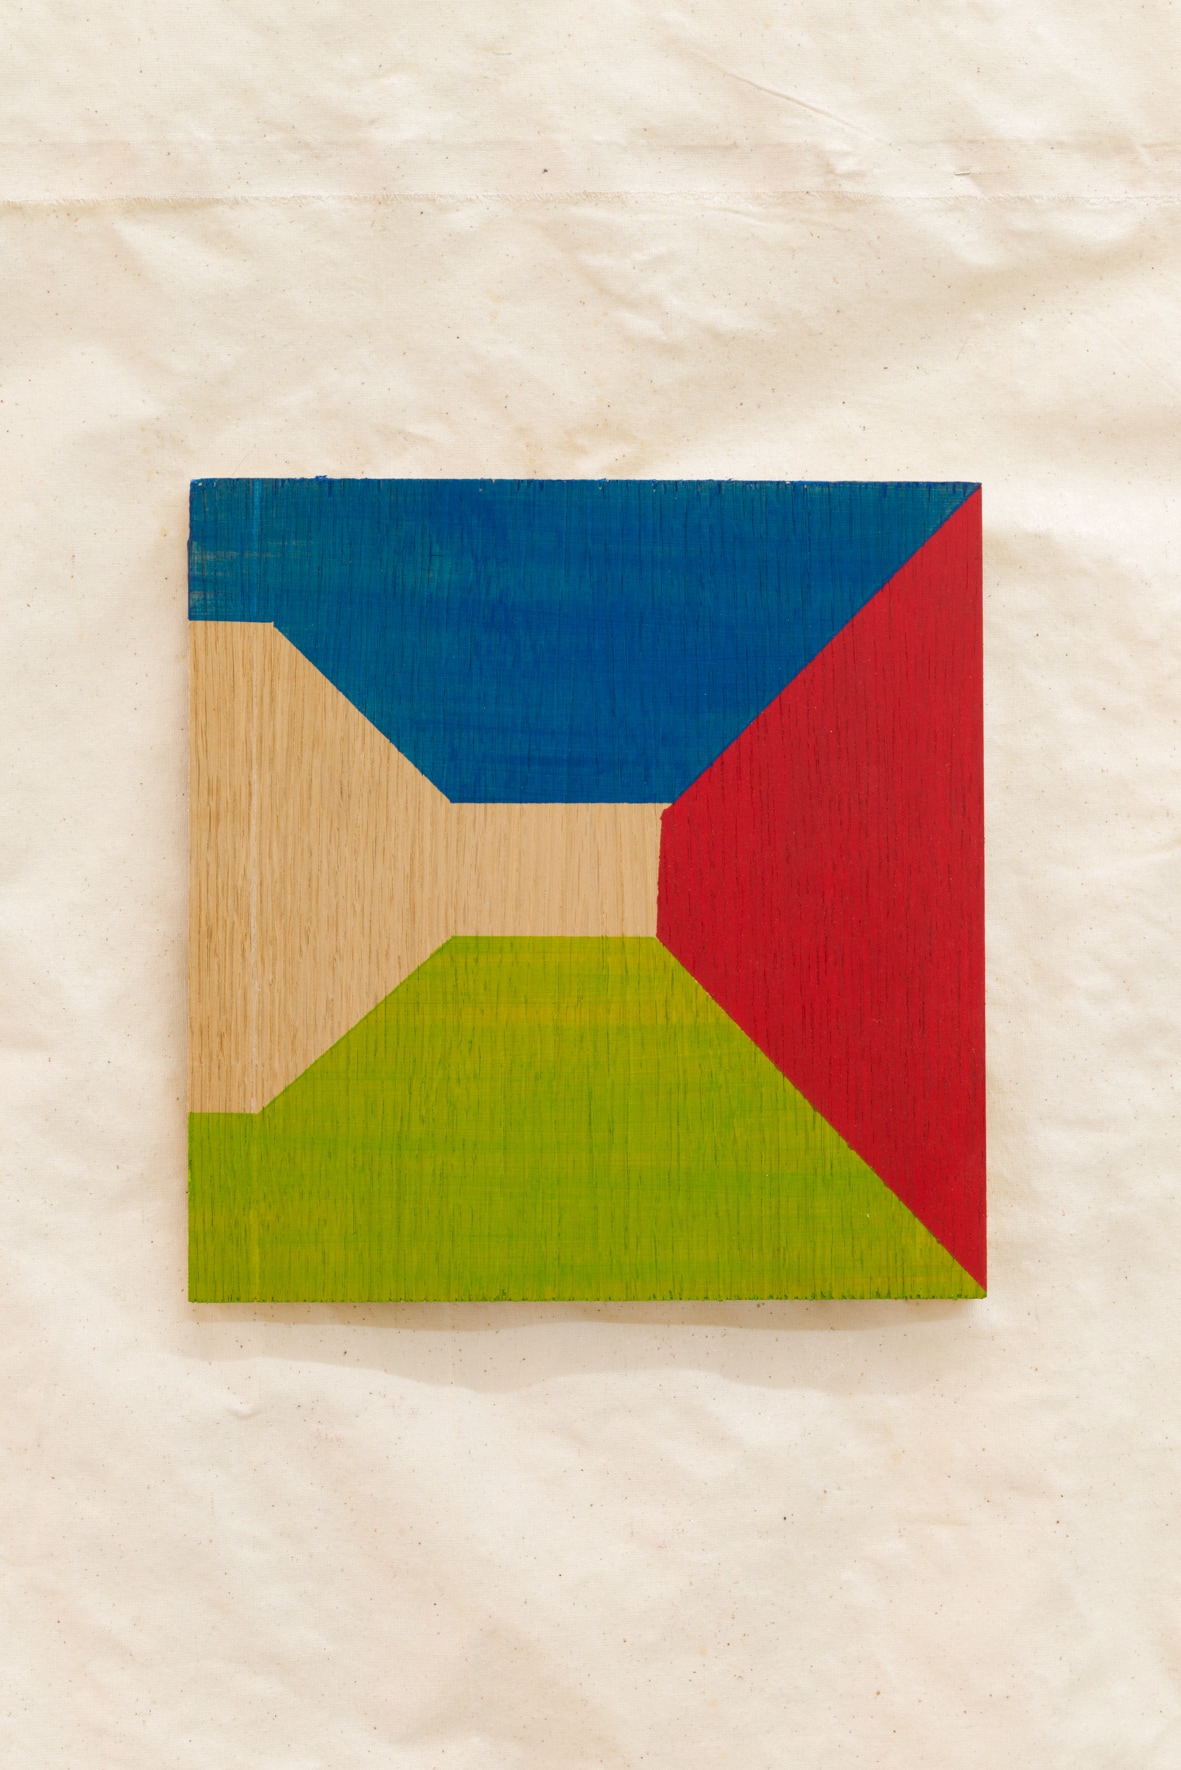 Charlie Jeffery, Illusions for people (again) #1 (blue/green/red), 2016
Acrylic paint on wood